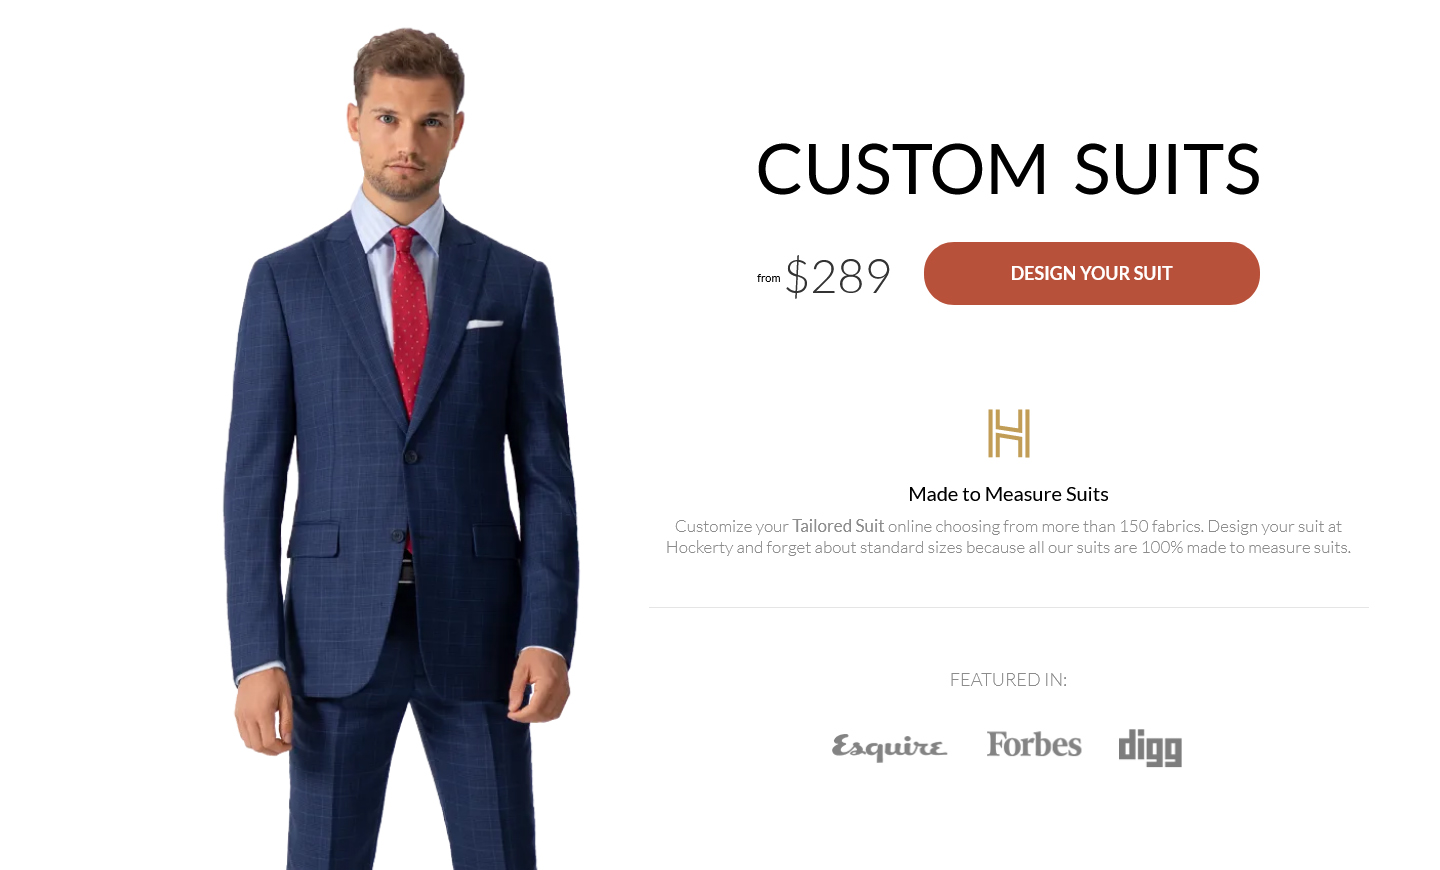 Hockerty suits - 3D designer and online ordering